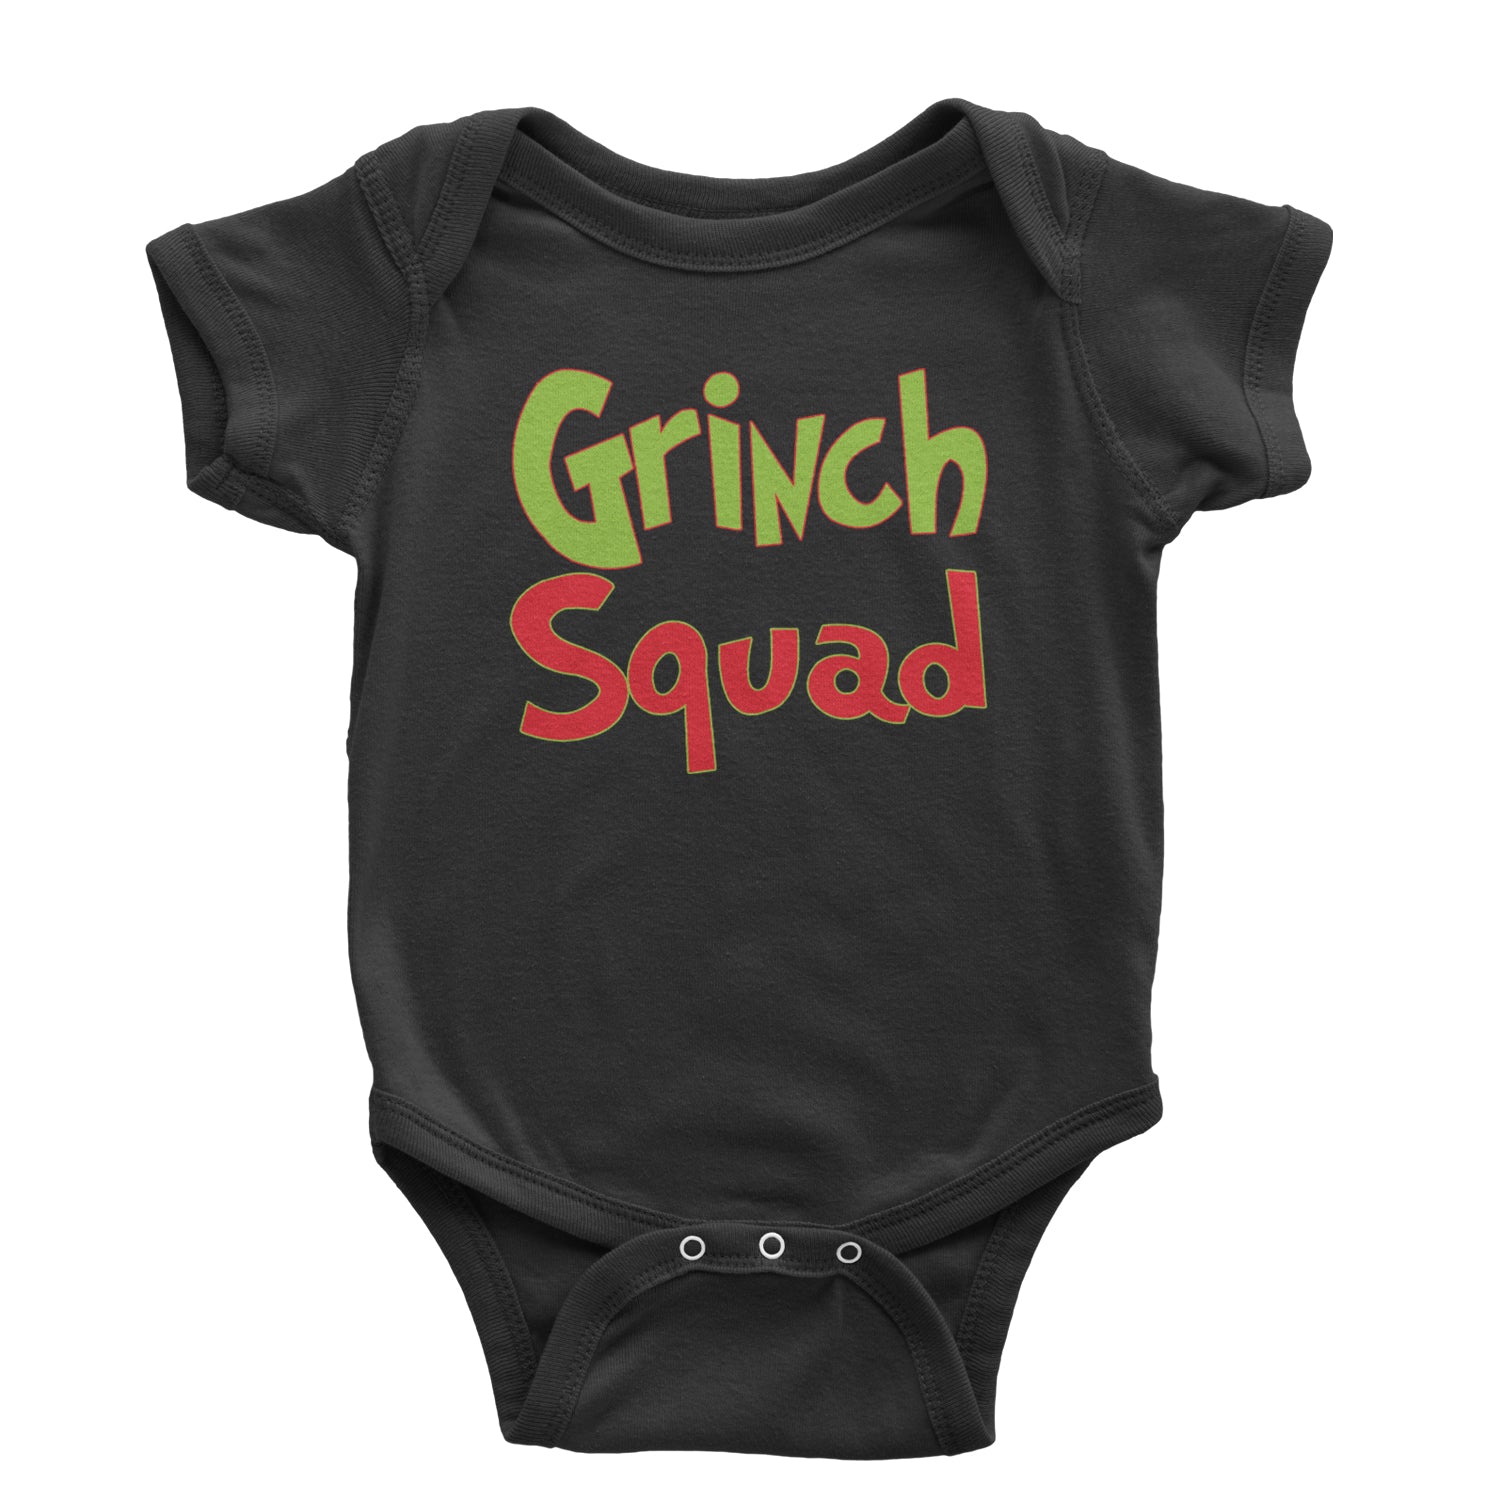 Gr-nch Squad Jolly Grinchmas Merry Christmas Infant One-Piece Romper Bodysuit and Toddler T-shirt